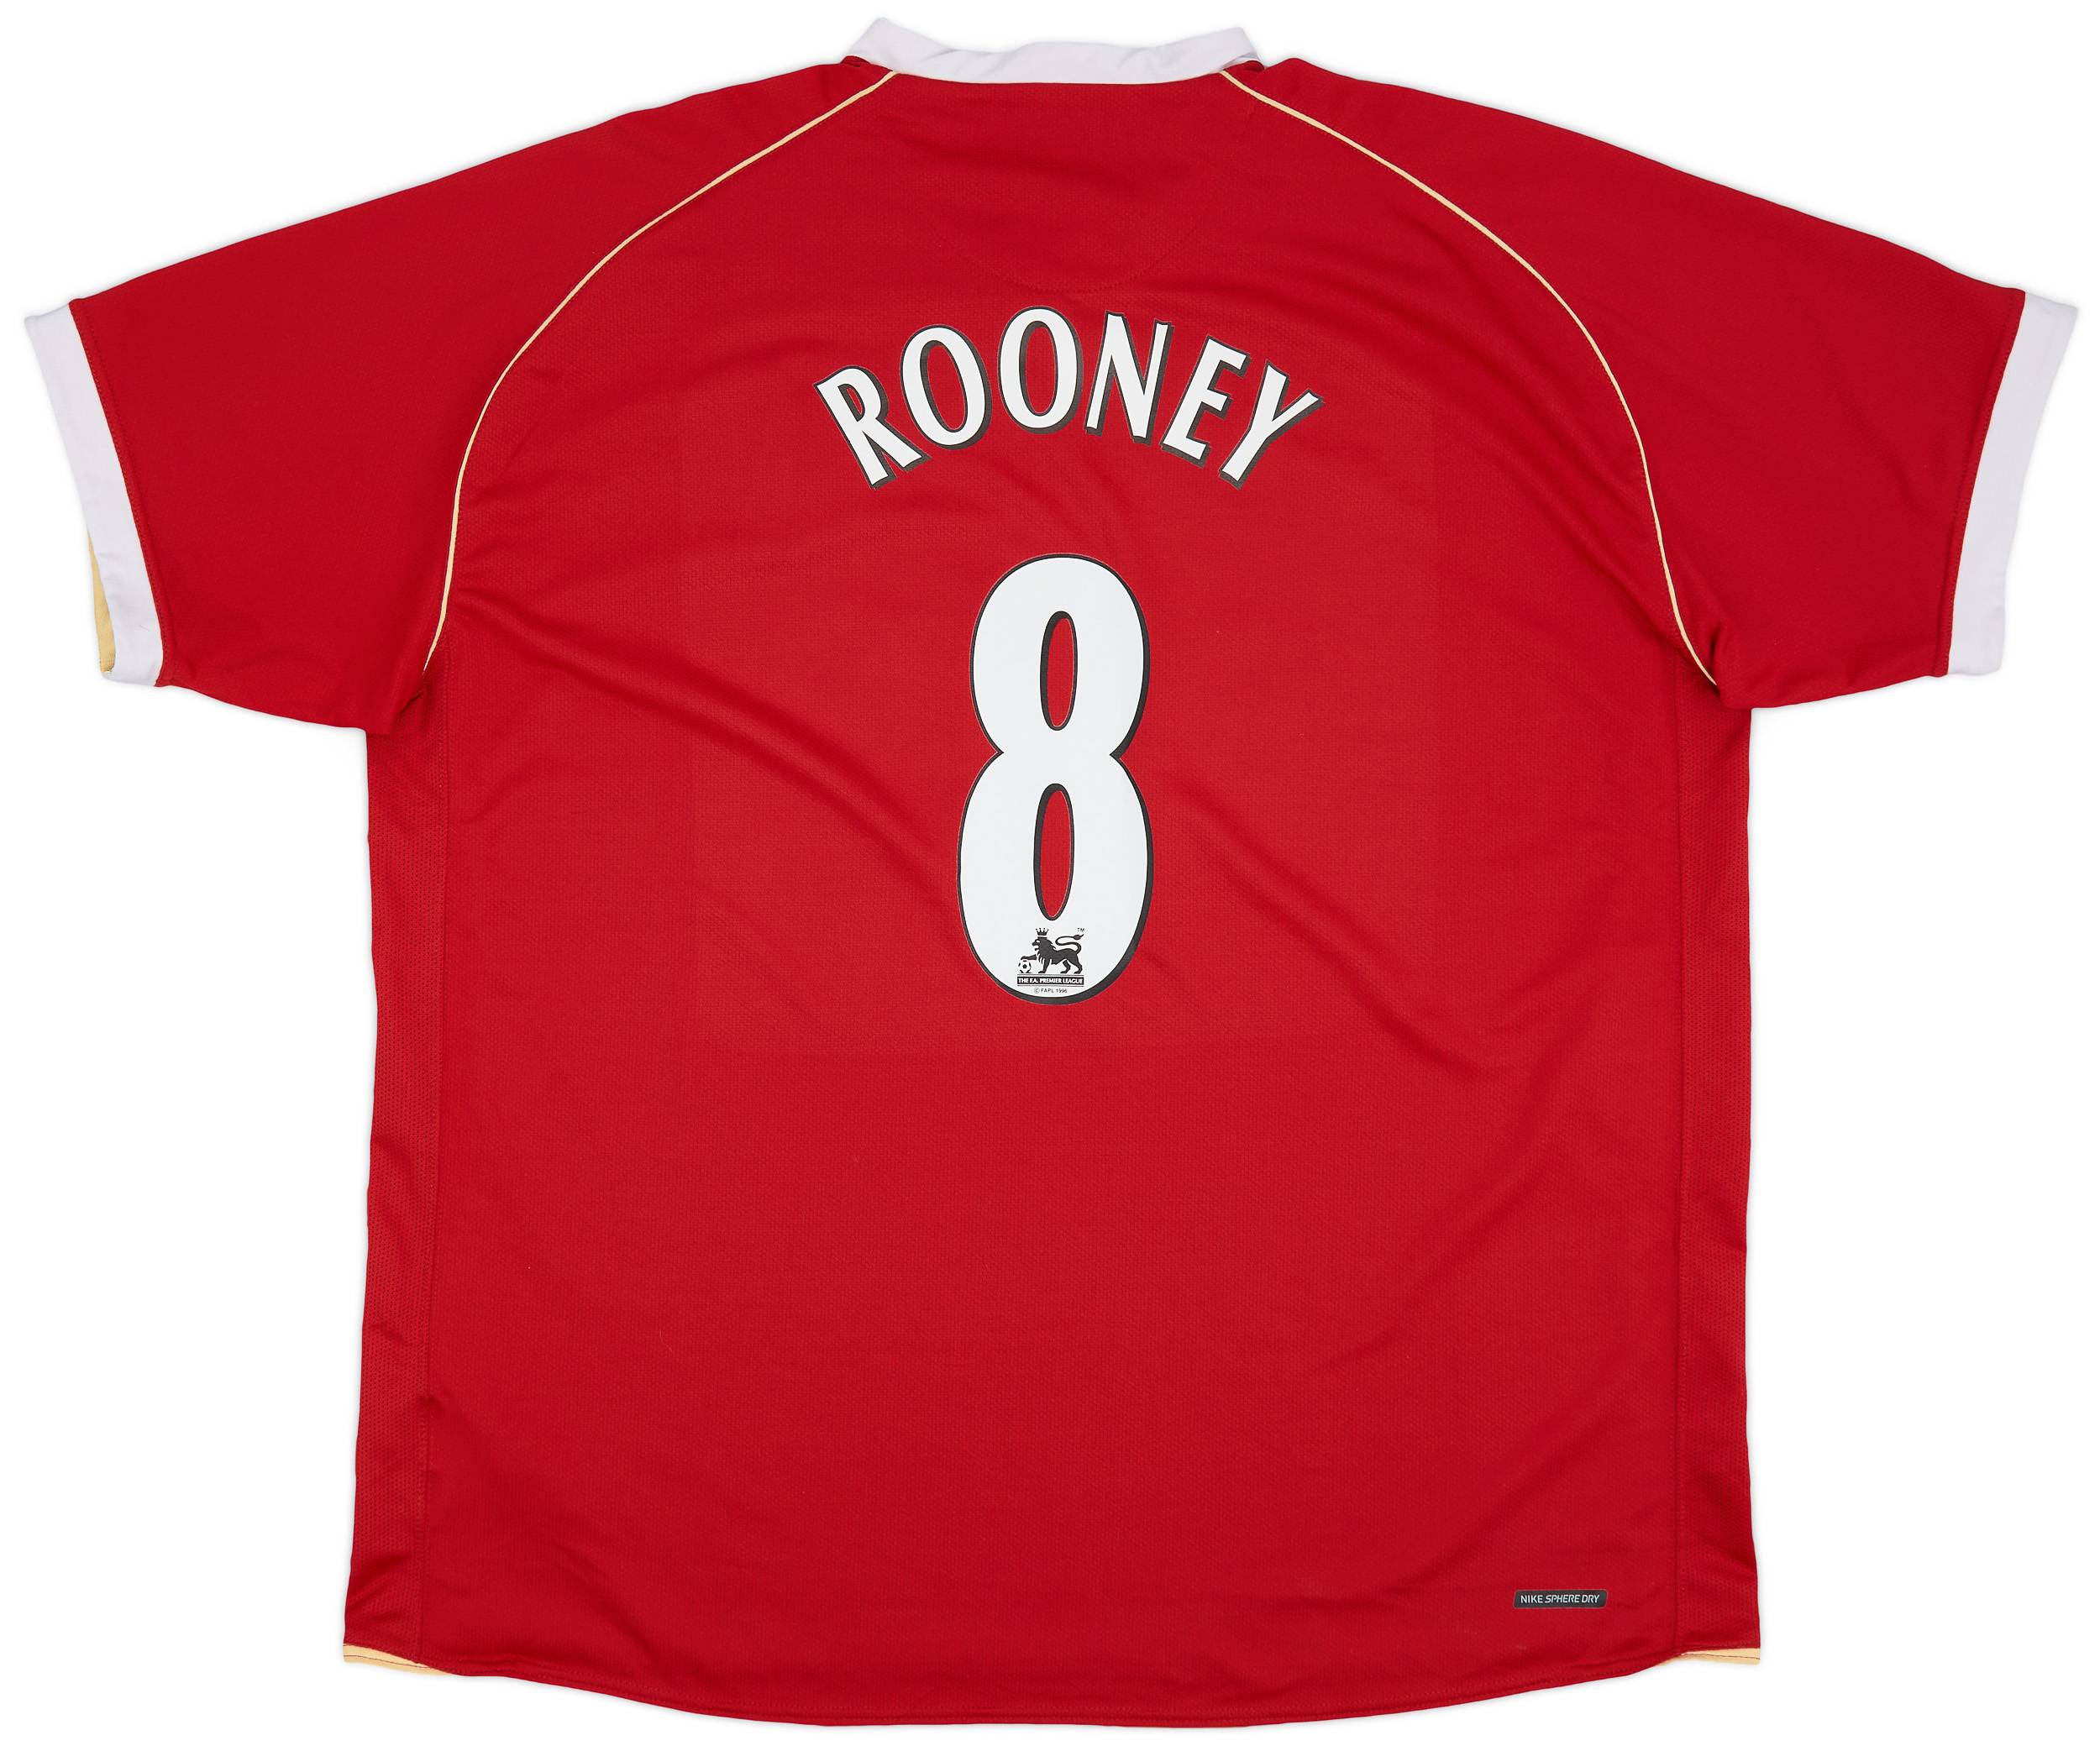 2006-07 Manchester United Home Shirt Rooney #8 - 8/10 - (3XL)